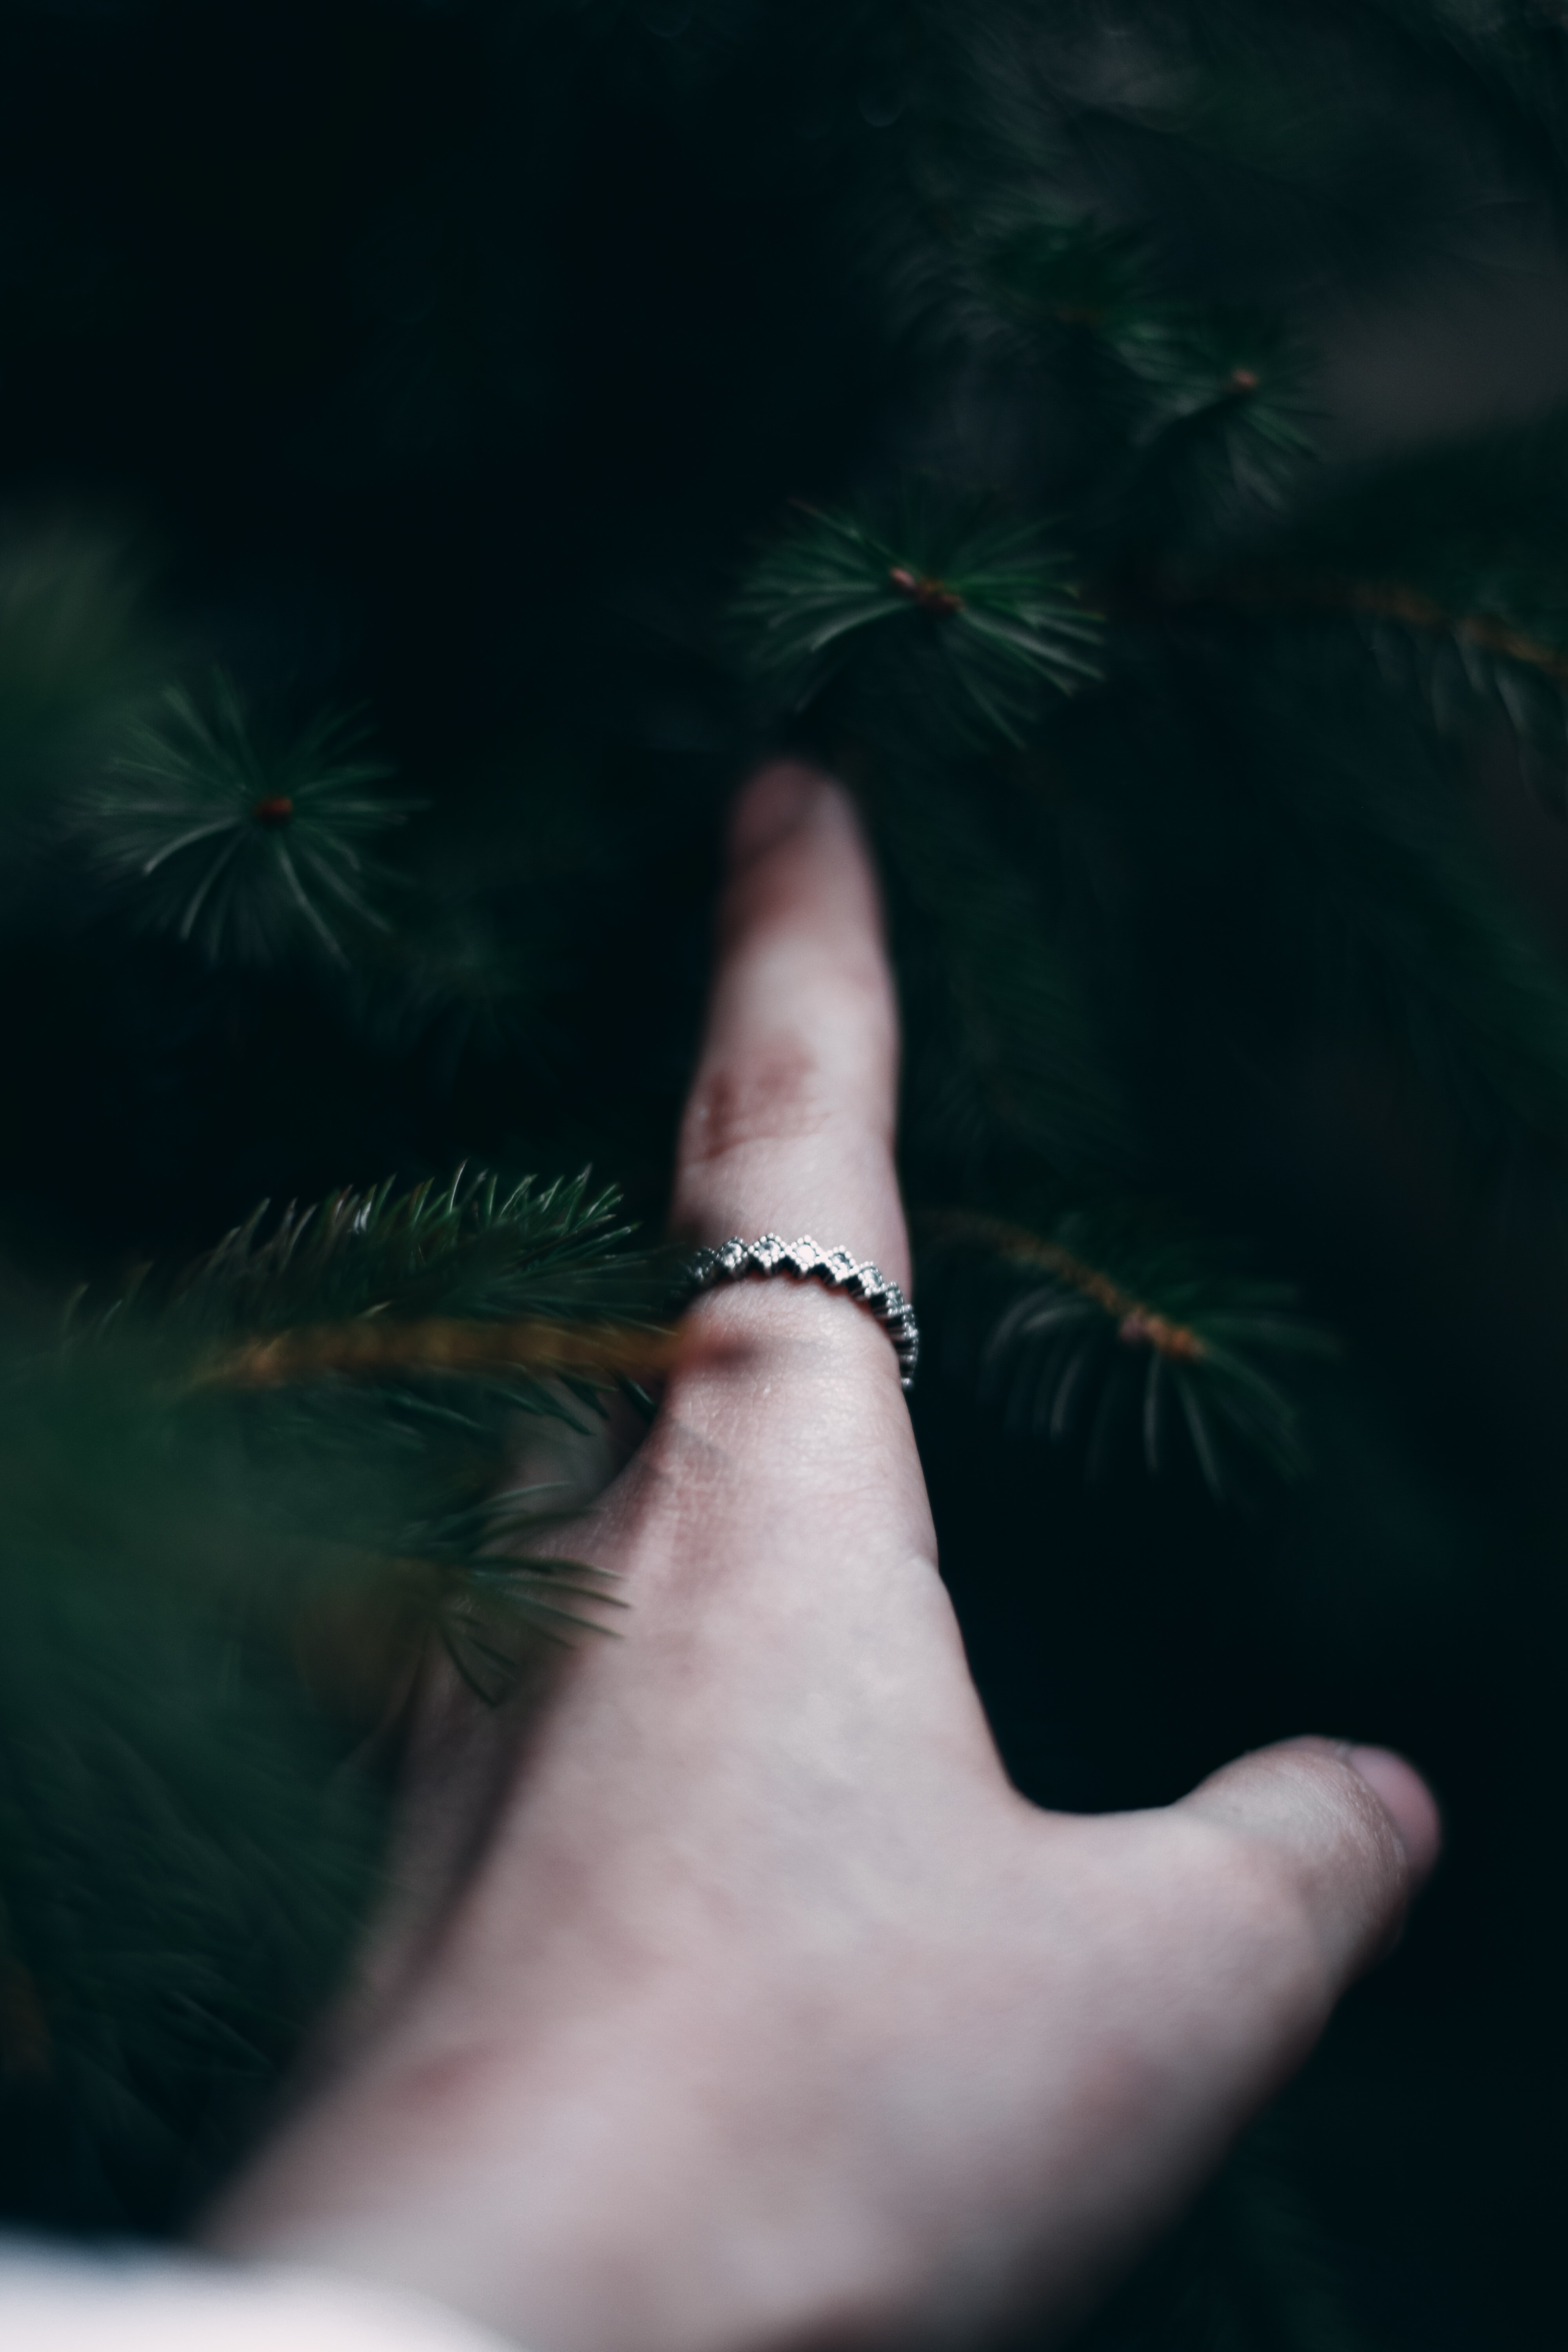 hand, miscellanea, miscellaneous, branches, spruce, fir, touching, touch, finger